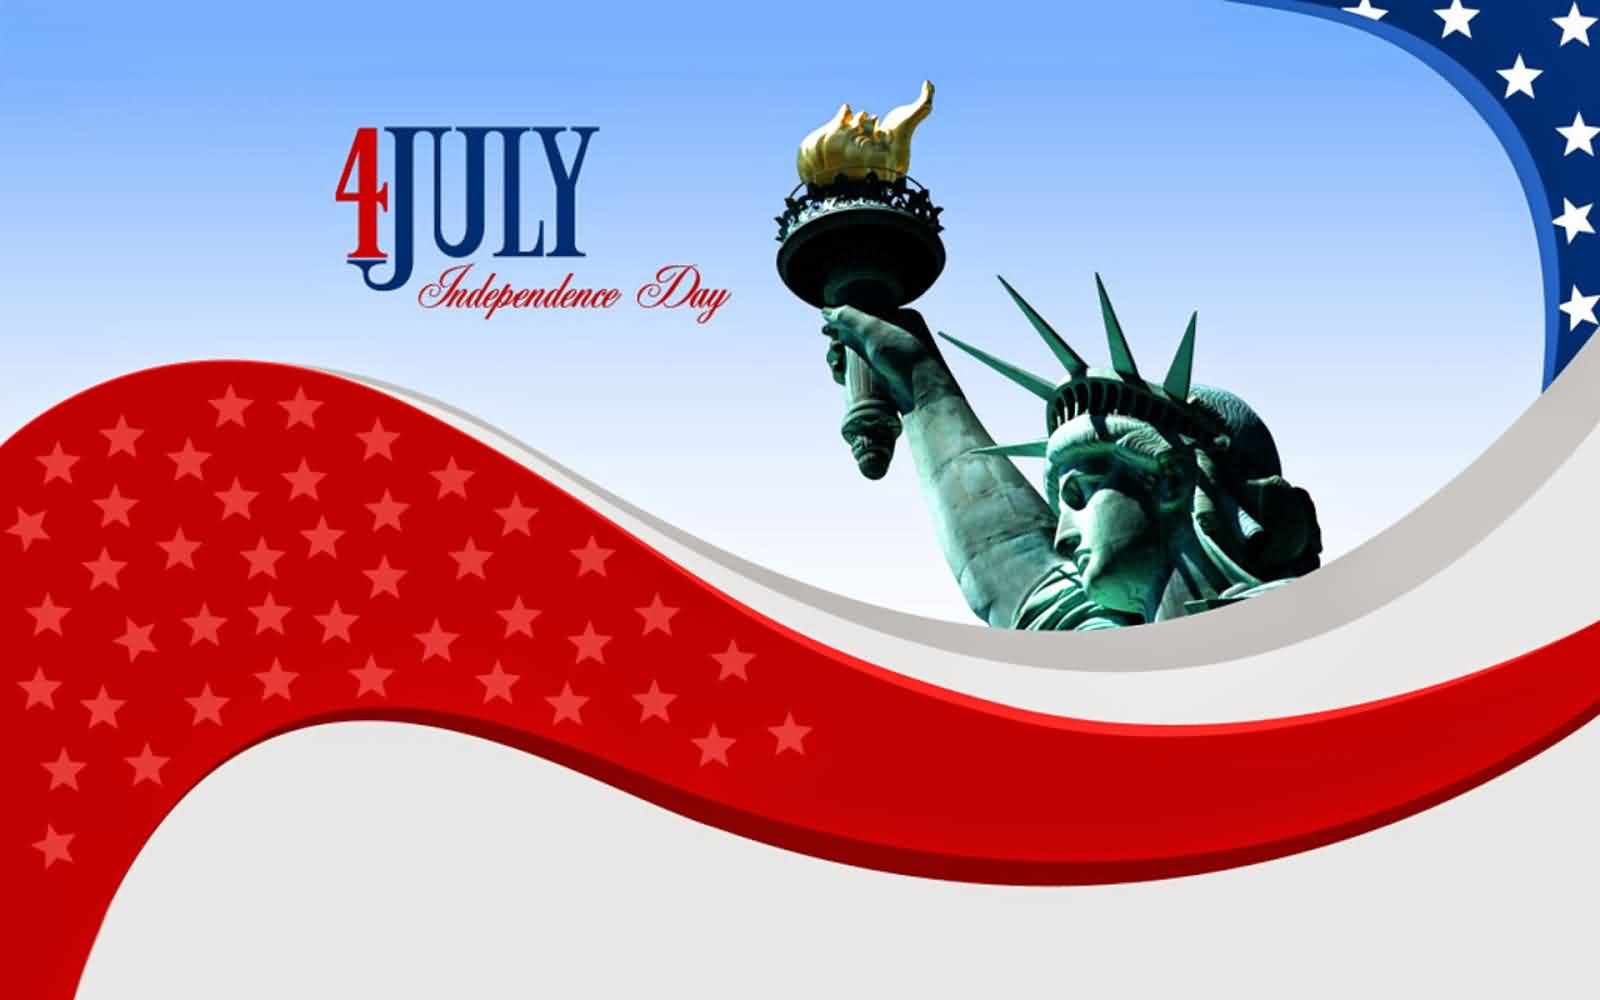 Fourth of July Wishes Message And Greetings Card Image